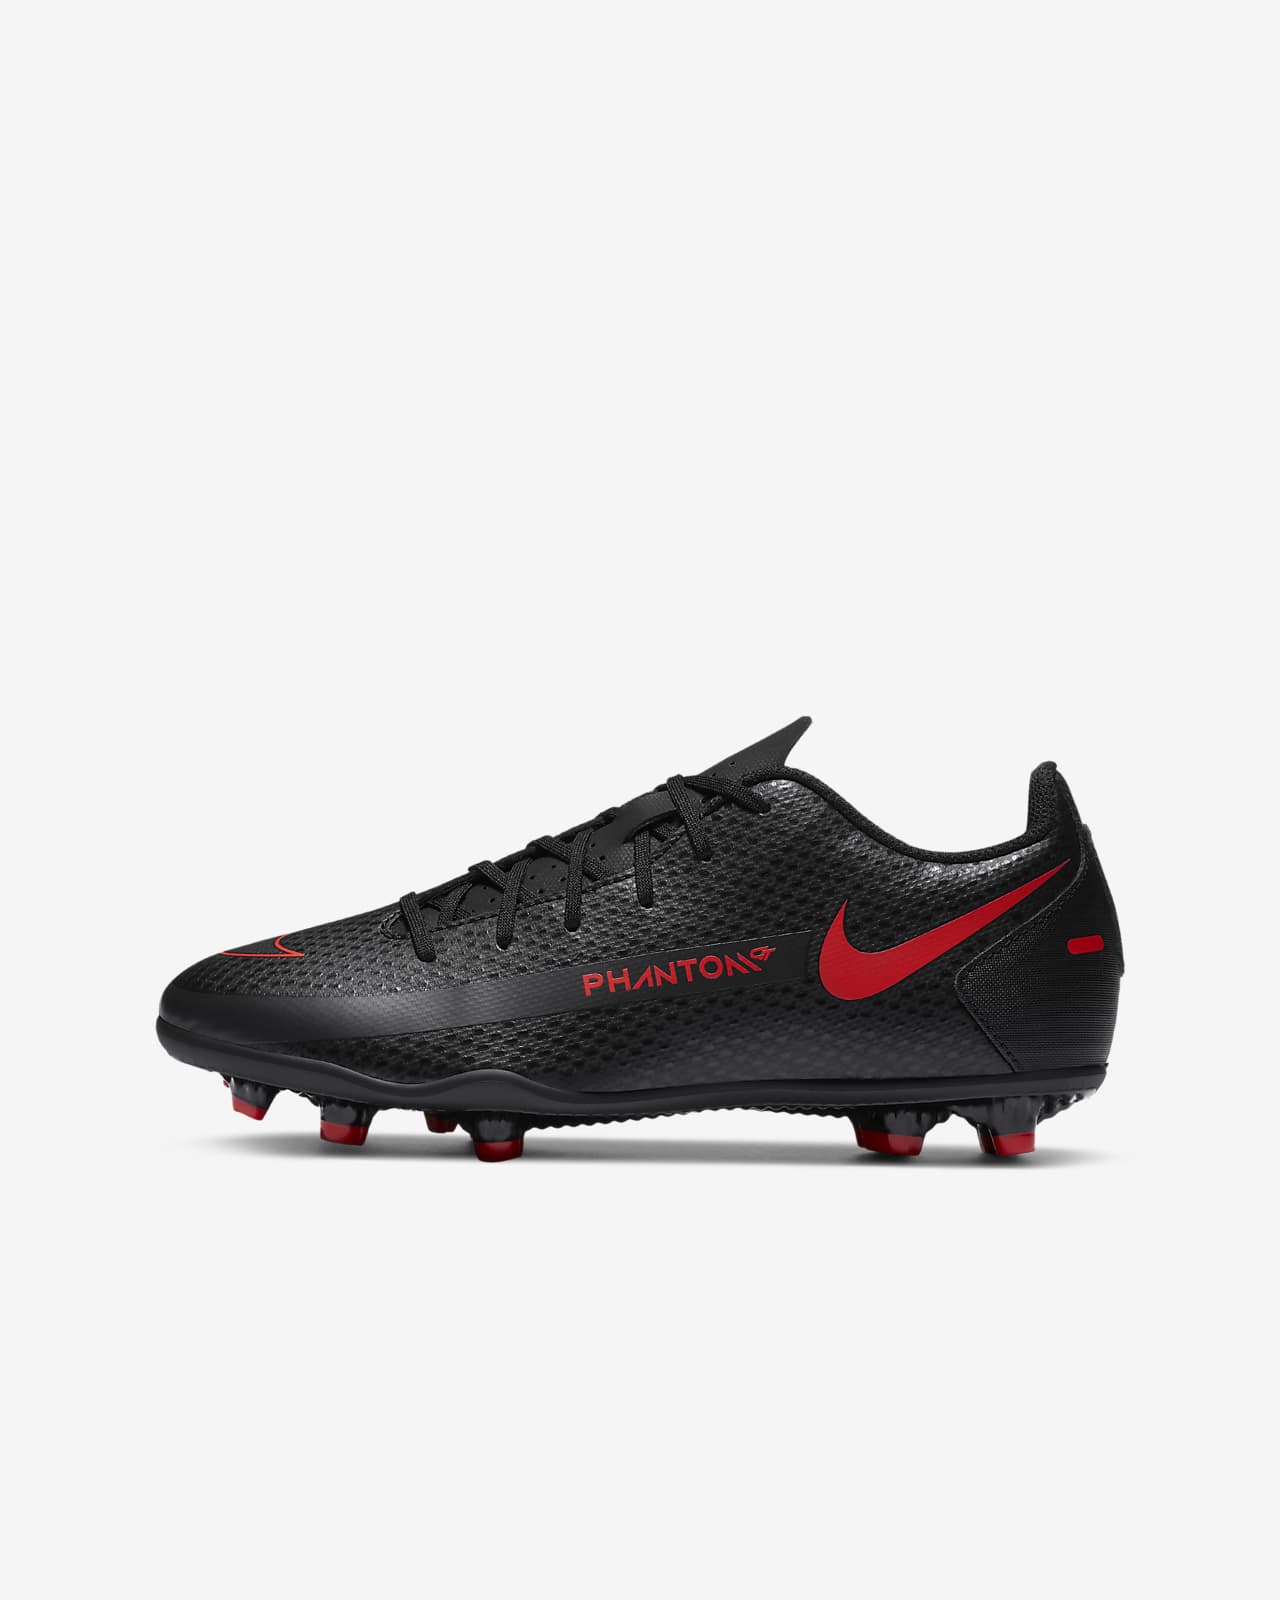 11c soccer cleats